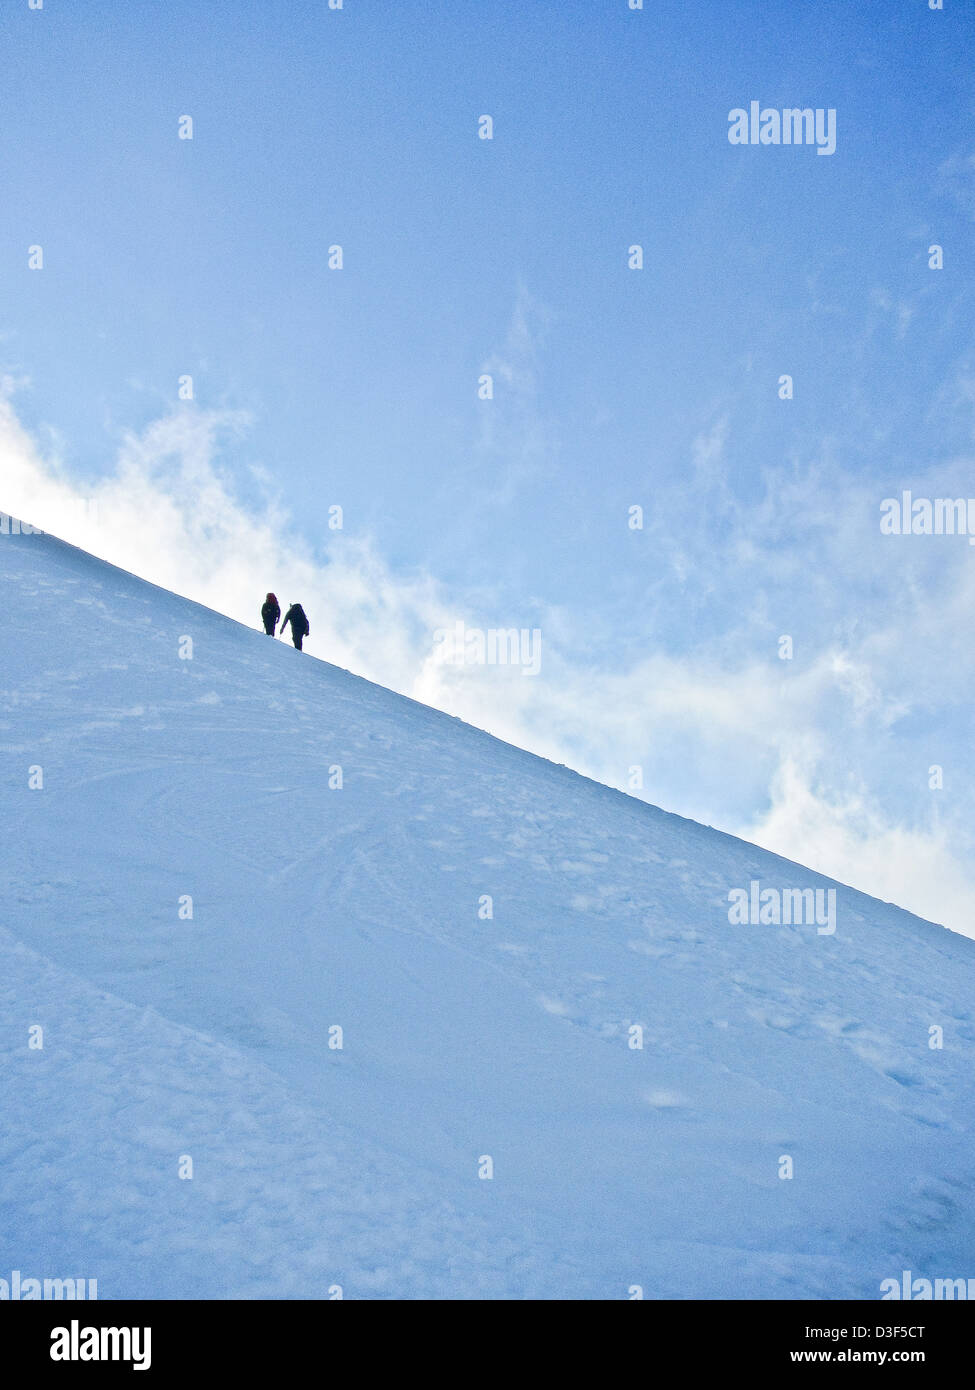 Two mountaineers on a snow slope in Scotland in Winter Stock Photo